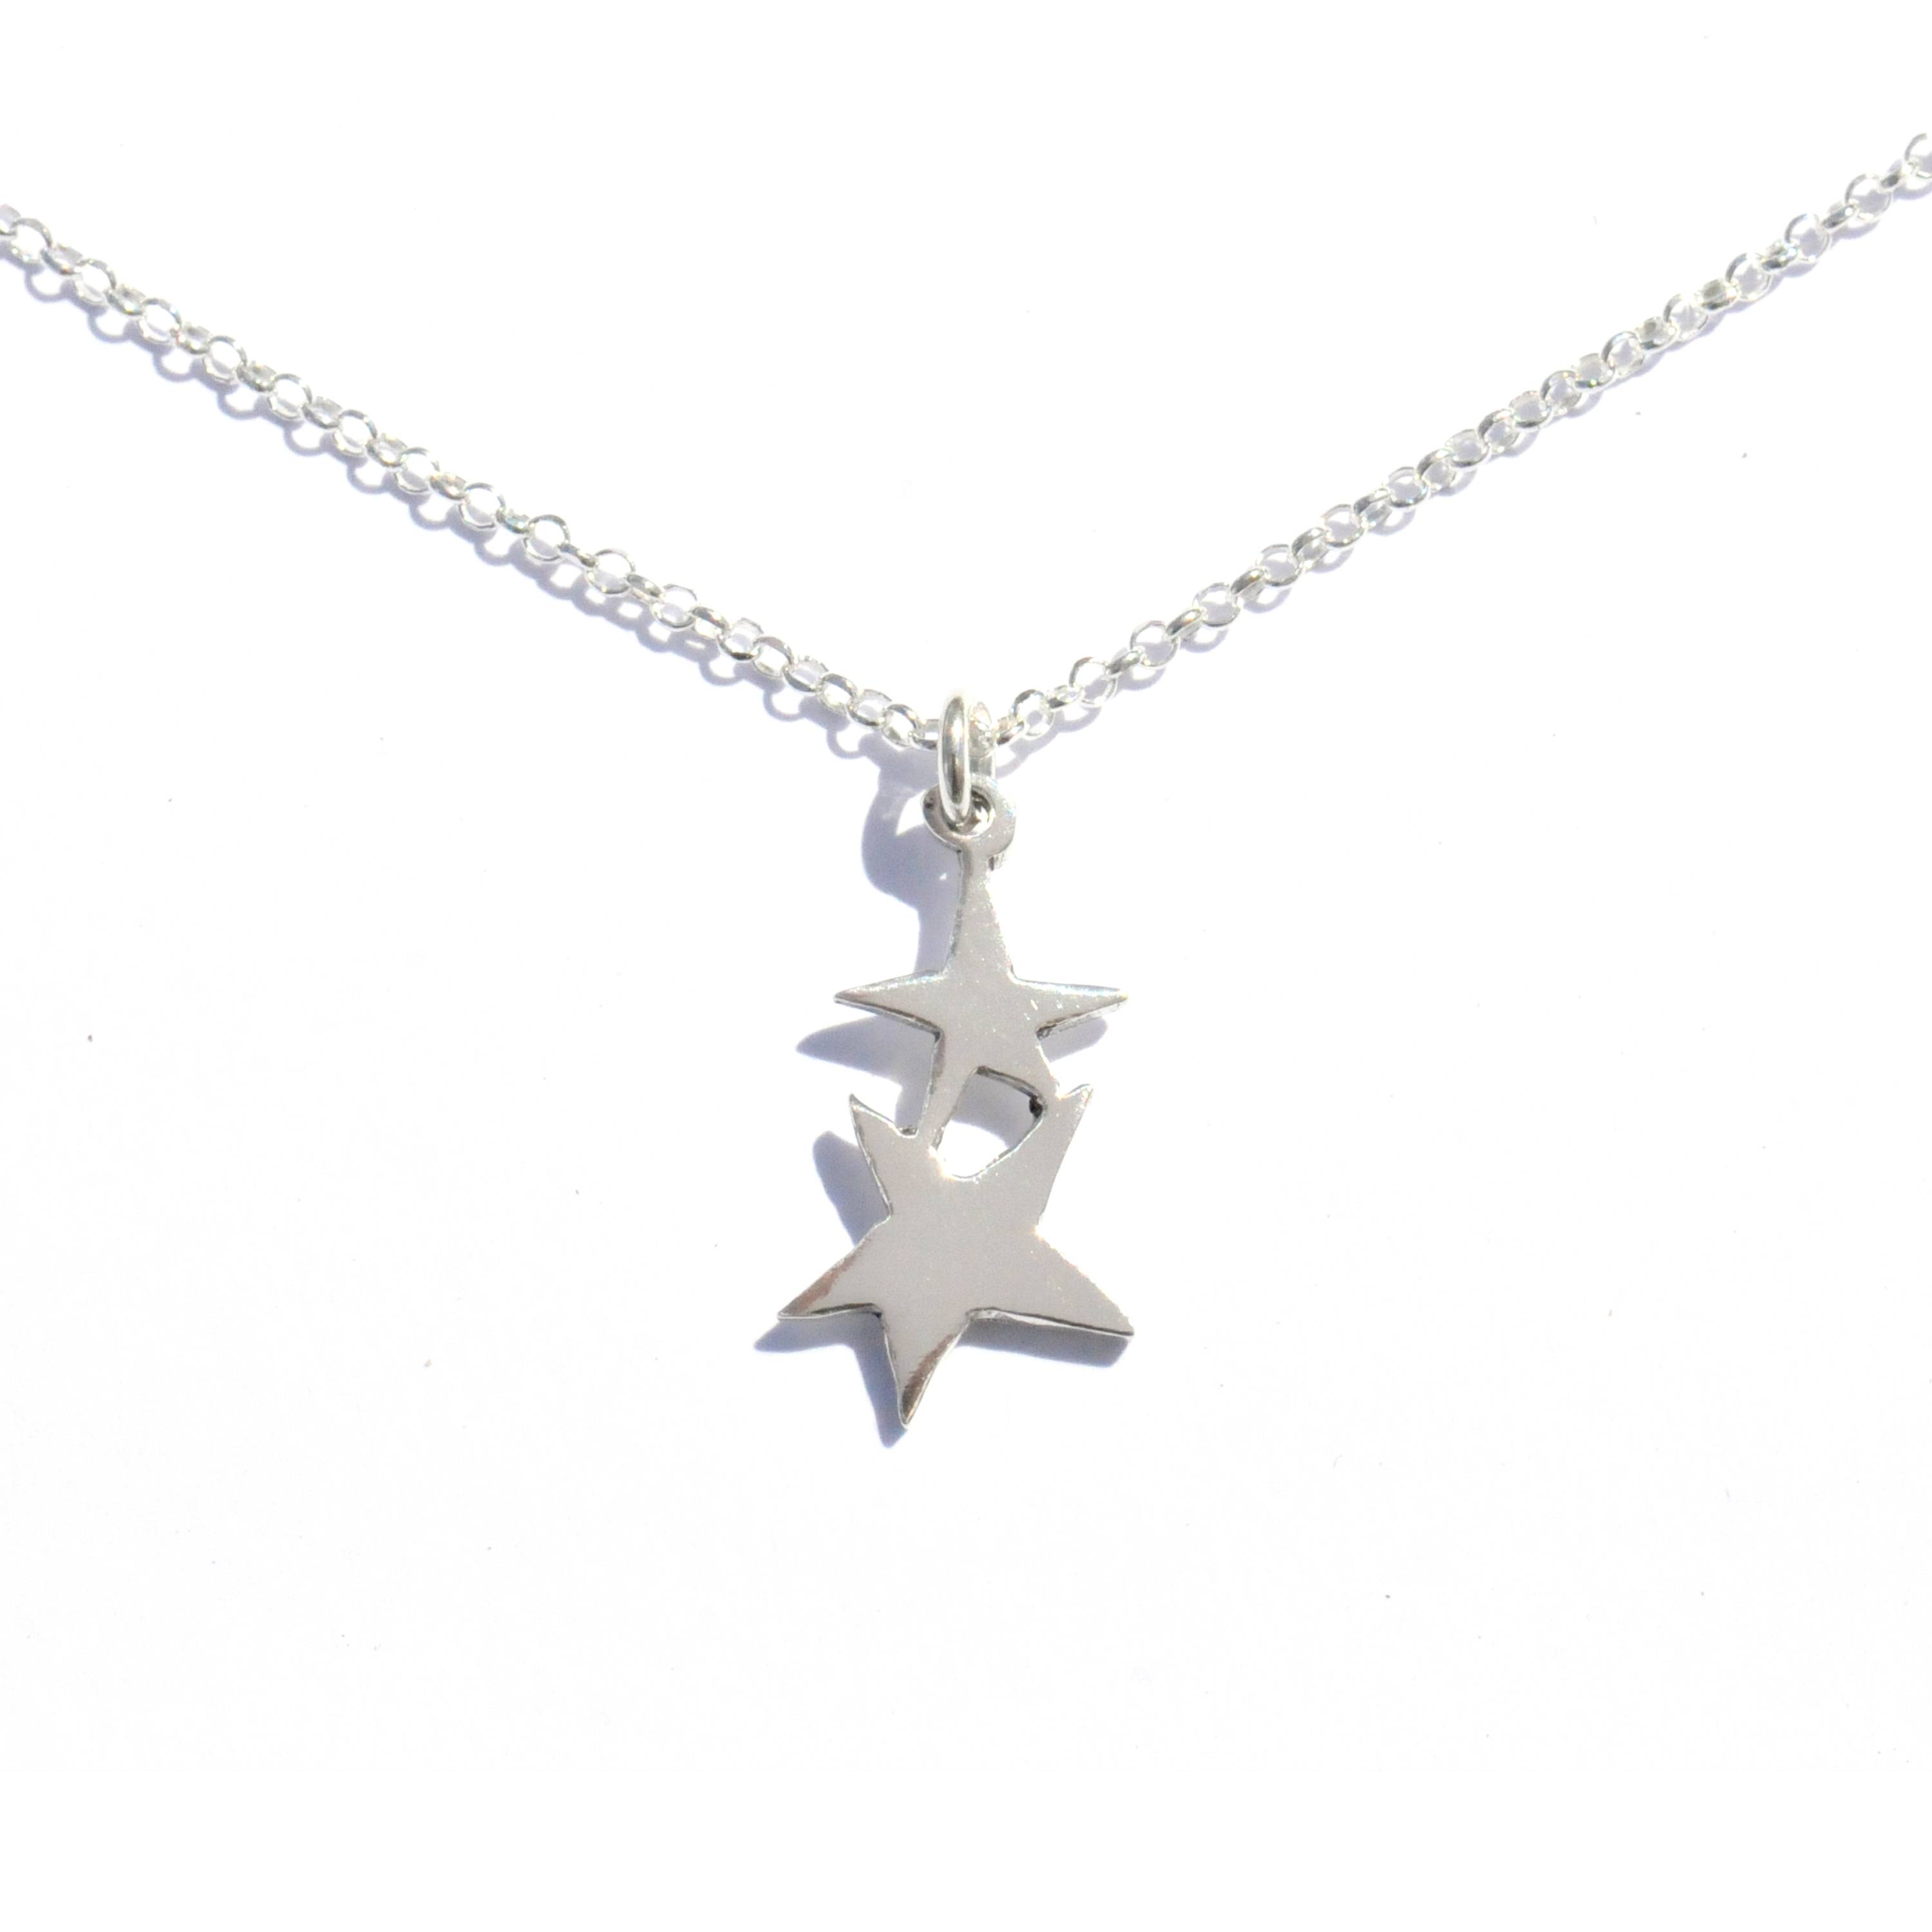 Comet Star Silver Necklace for Women Tiny Necklace Handmade Silver Necklace Zircon Stone Dainty Necklace NUR-4264 Statament Necklace